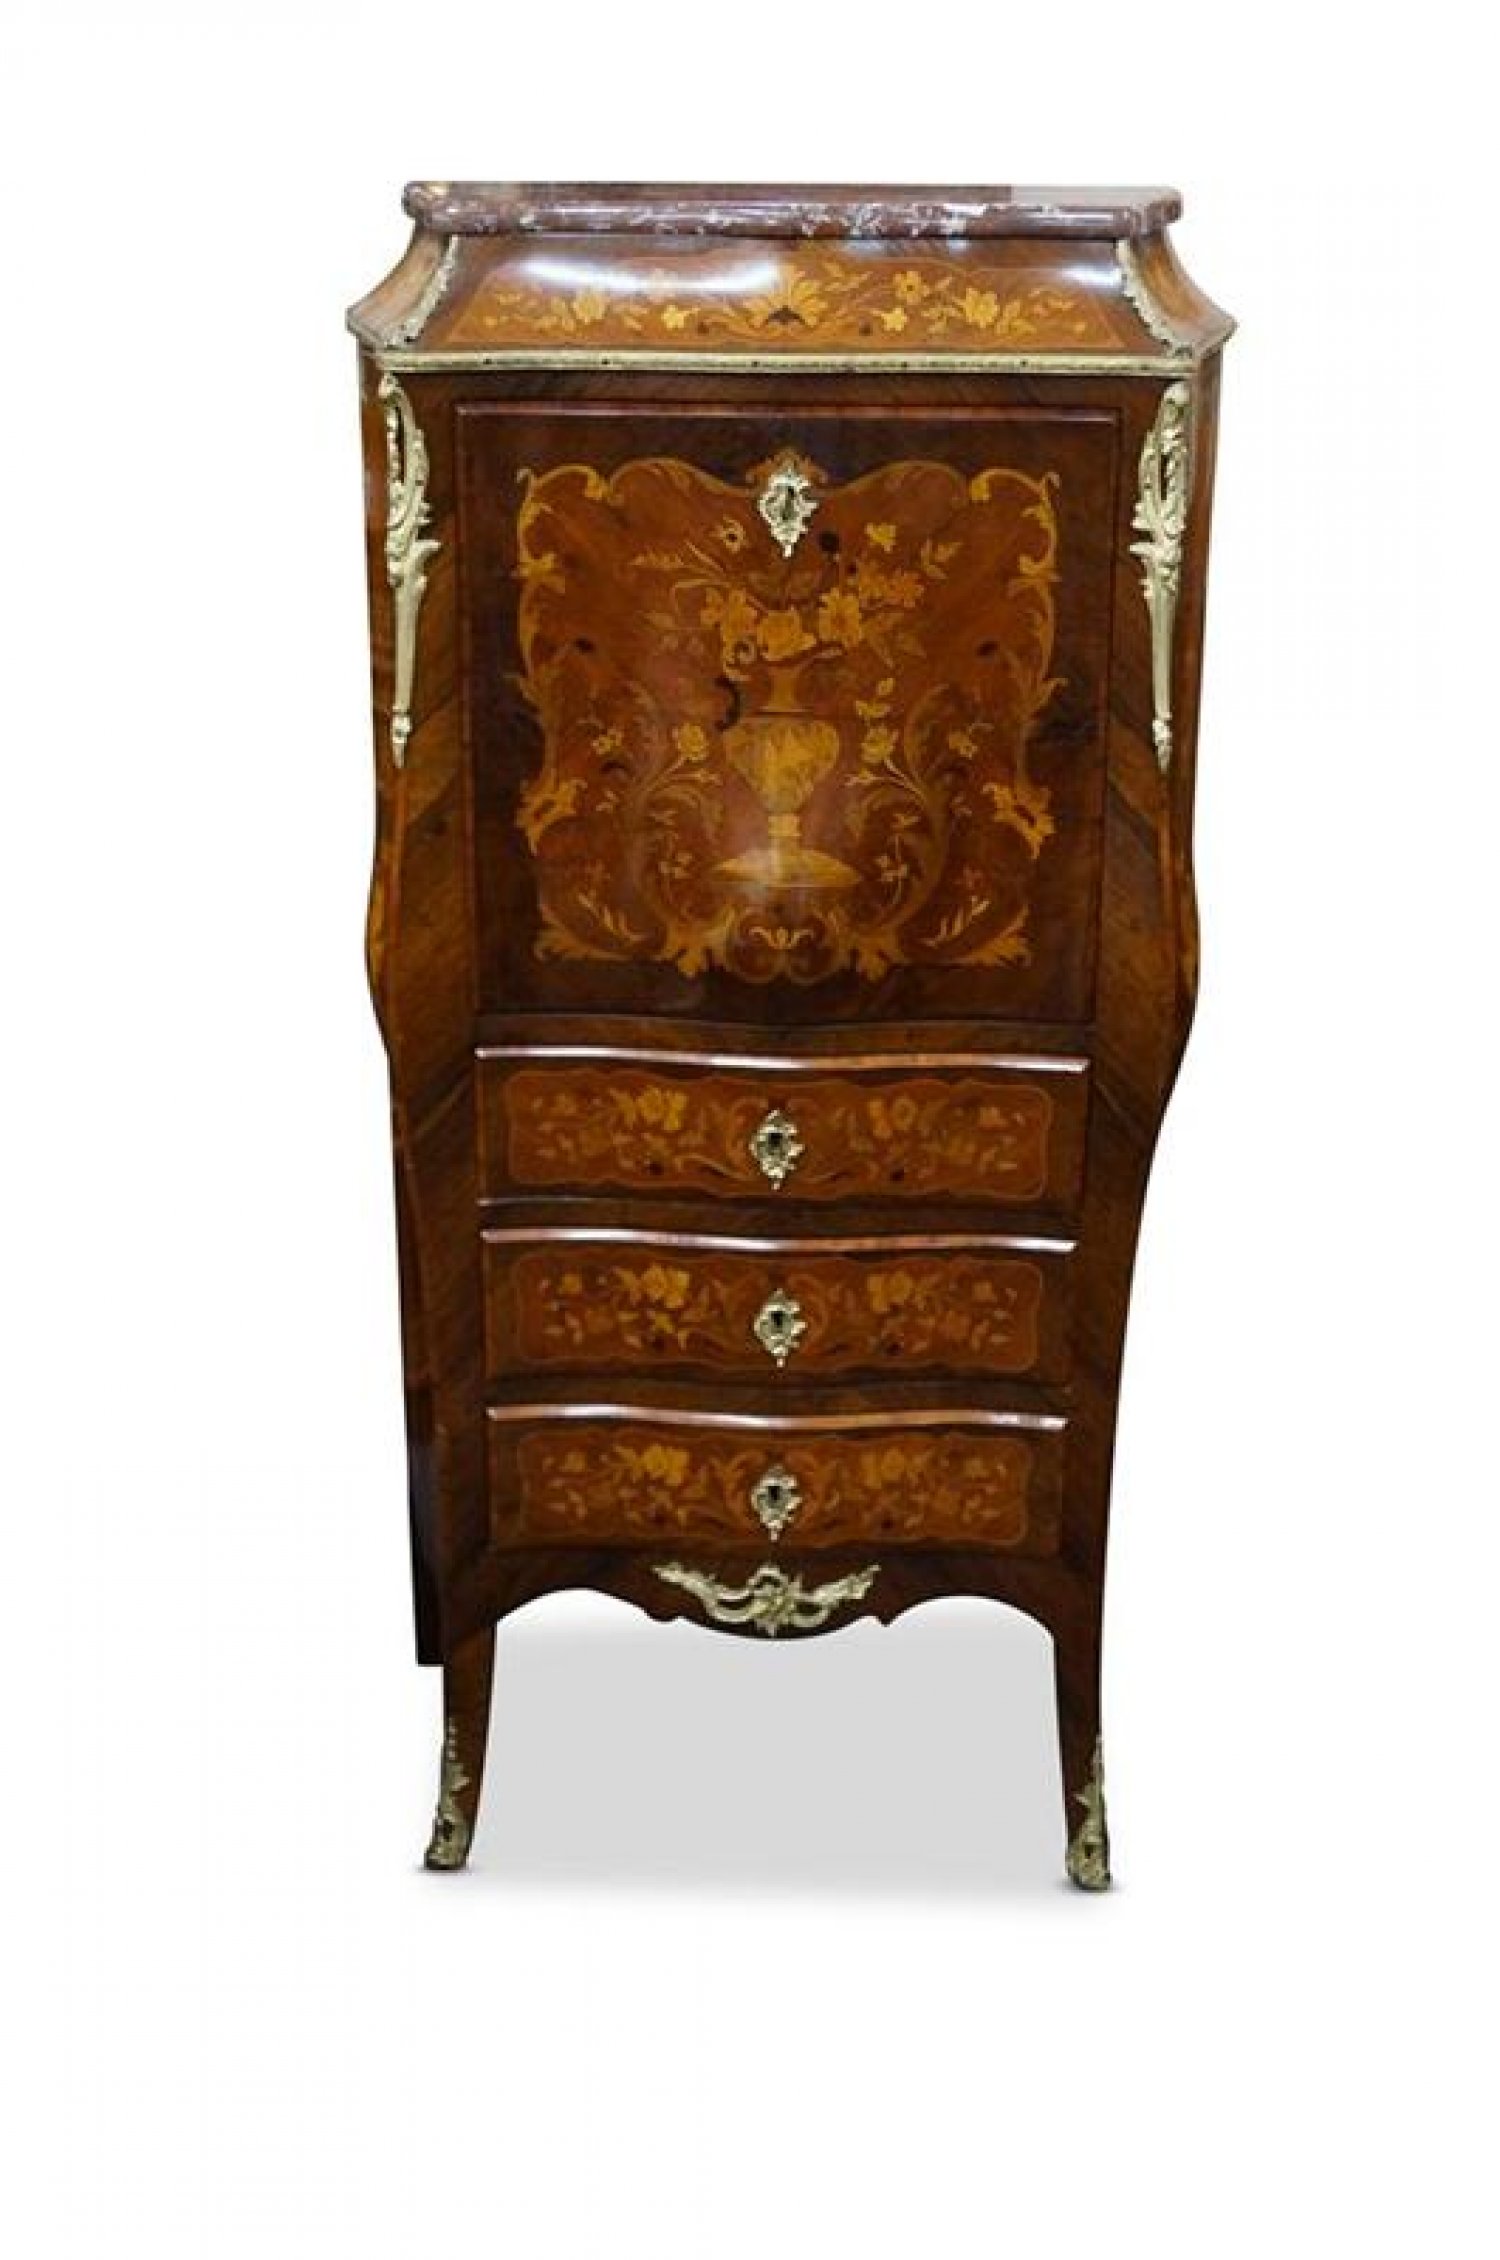 French Fall Front Bureau with Marquetry Inlays